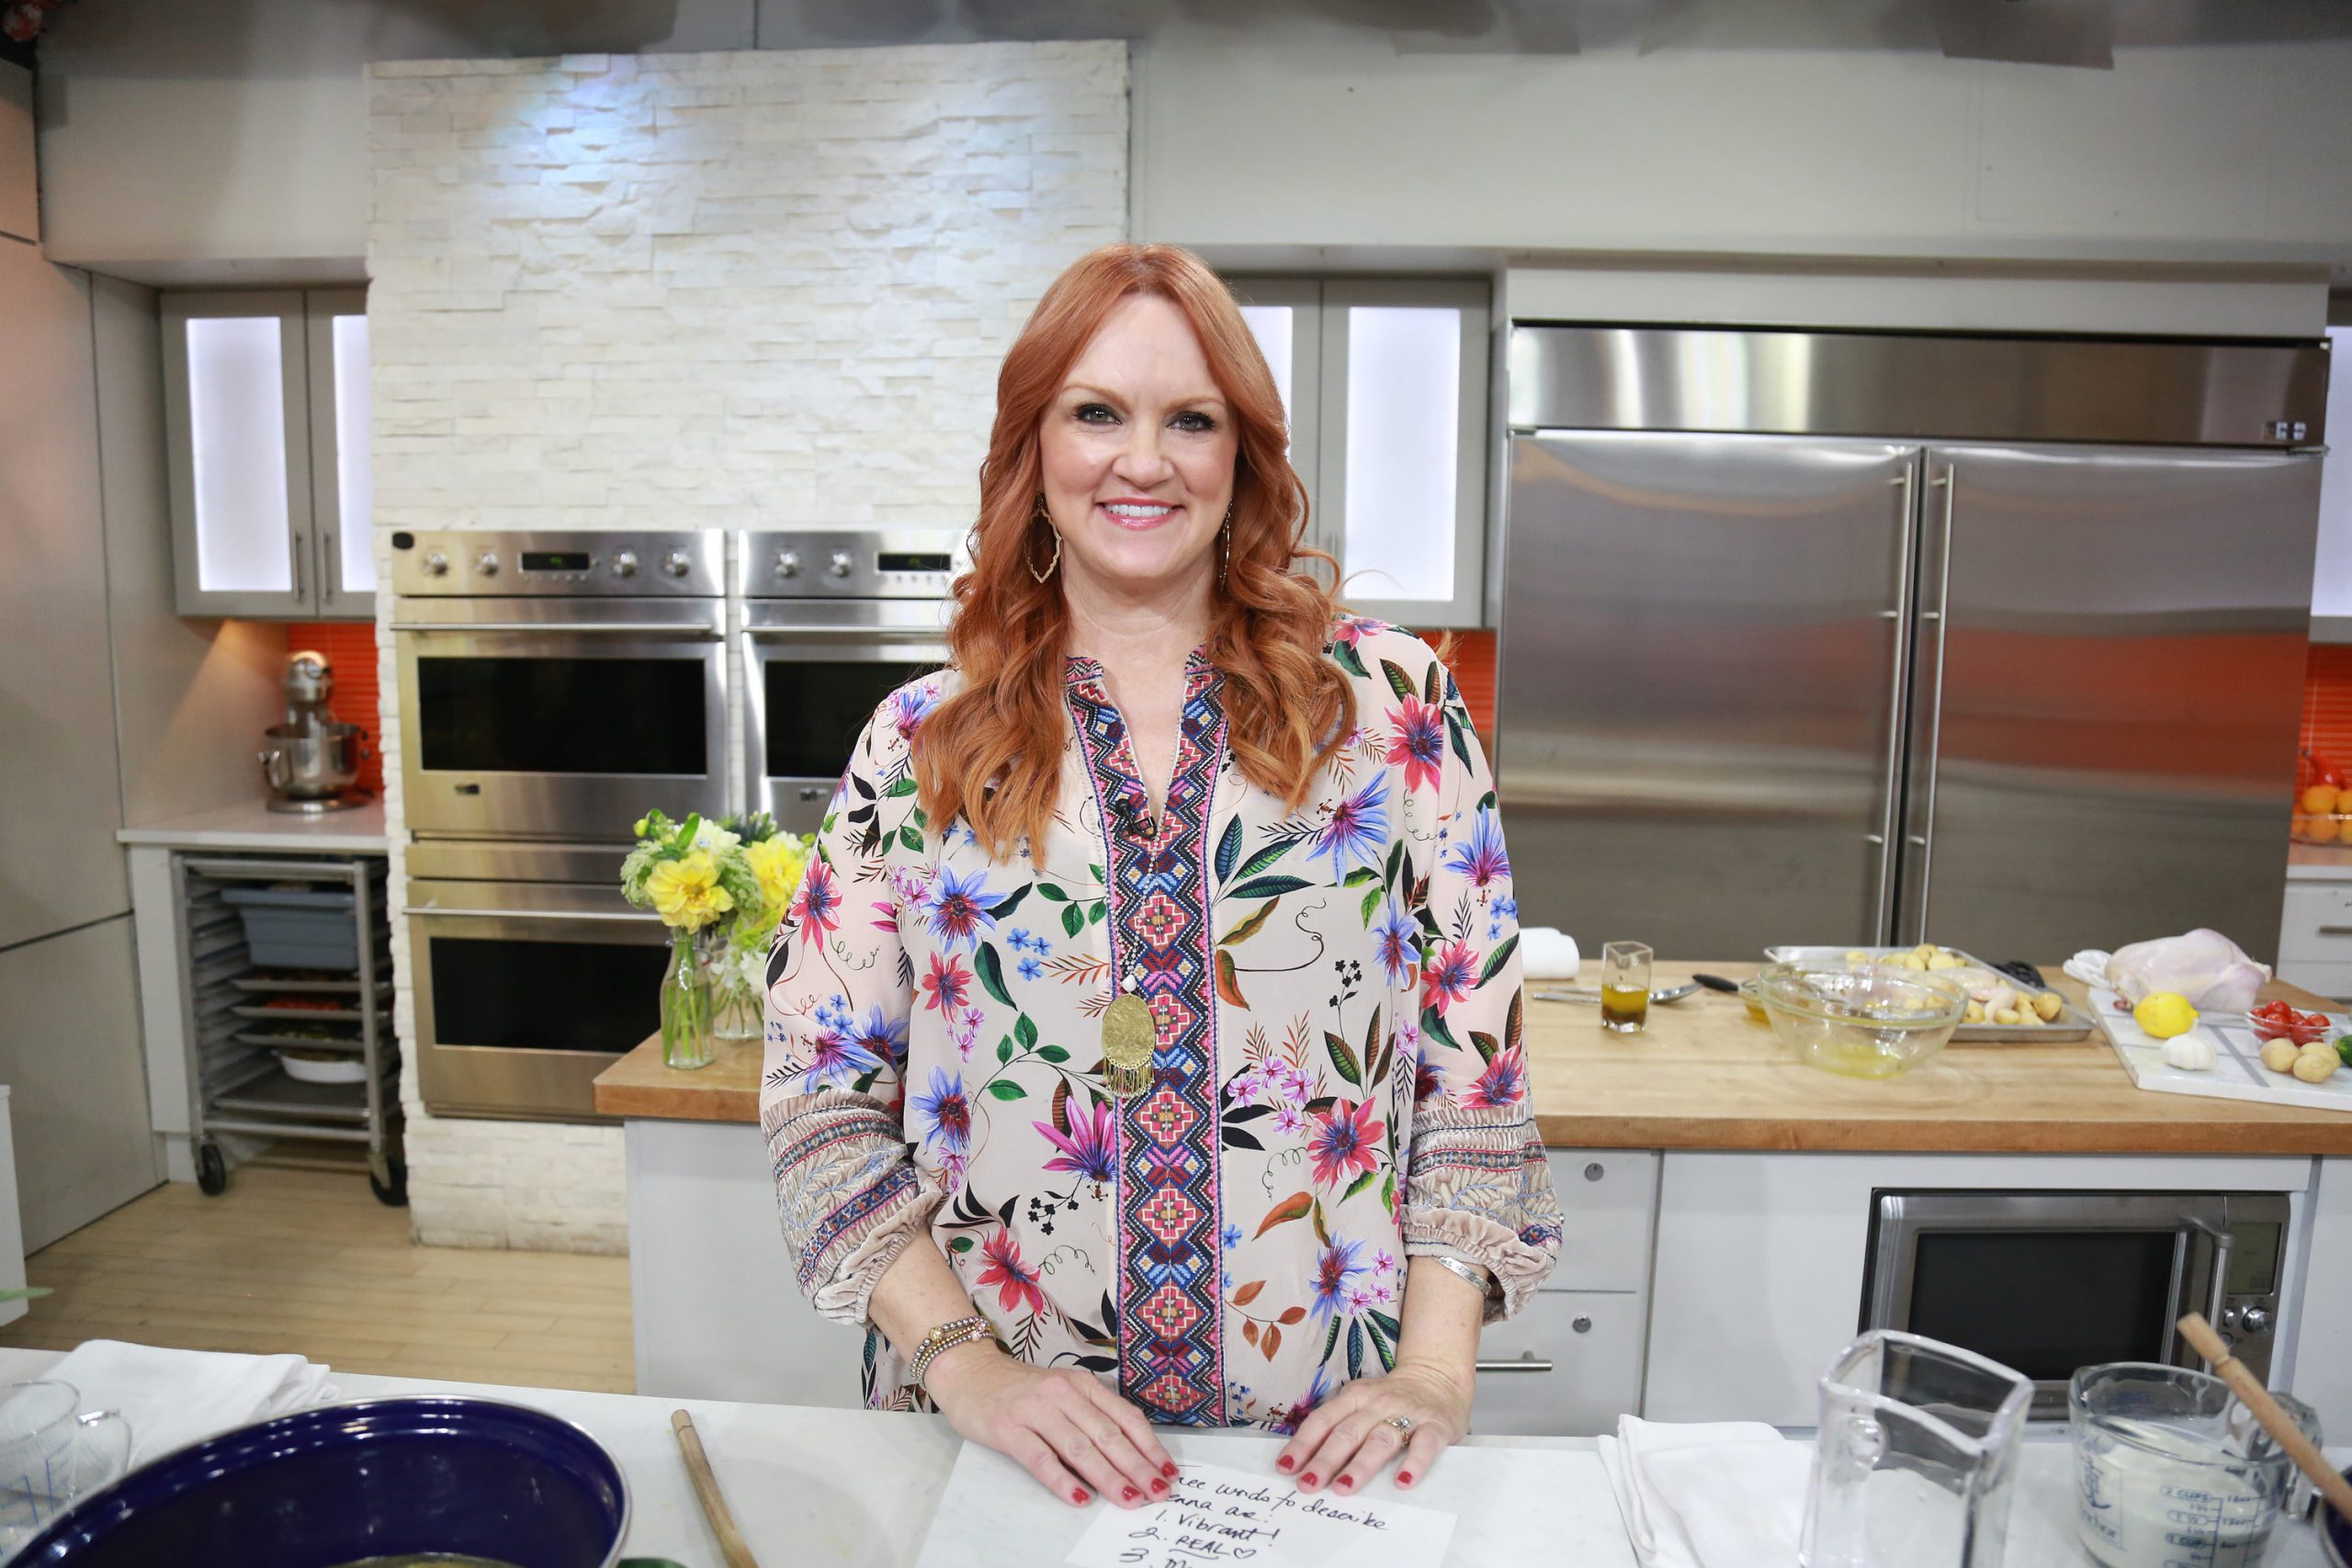 The Pioneer Woman Ree Drummond does a cooking demonstration on the Today show.